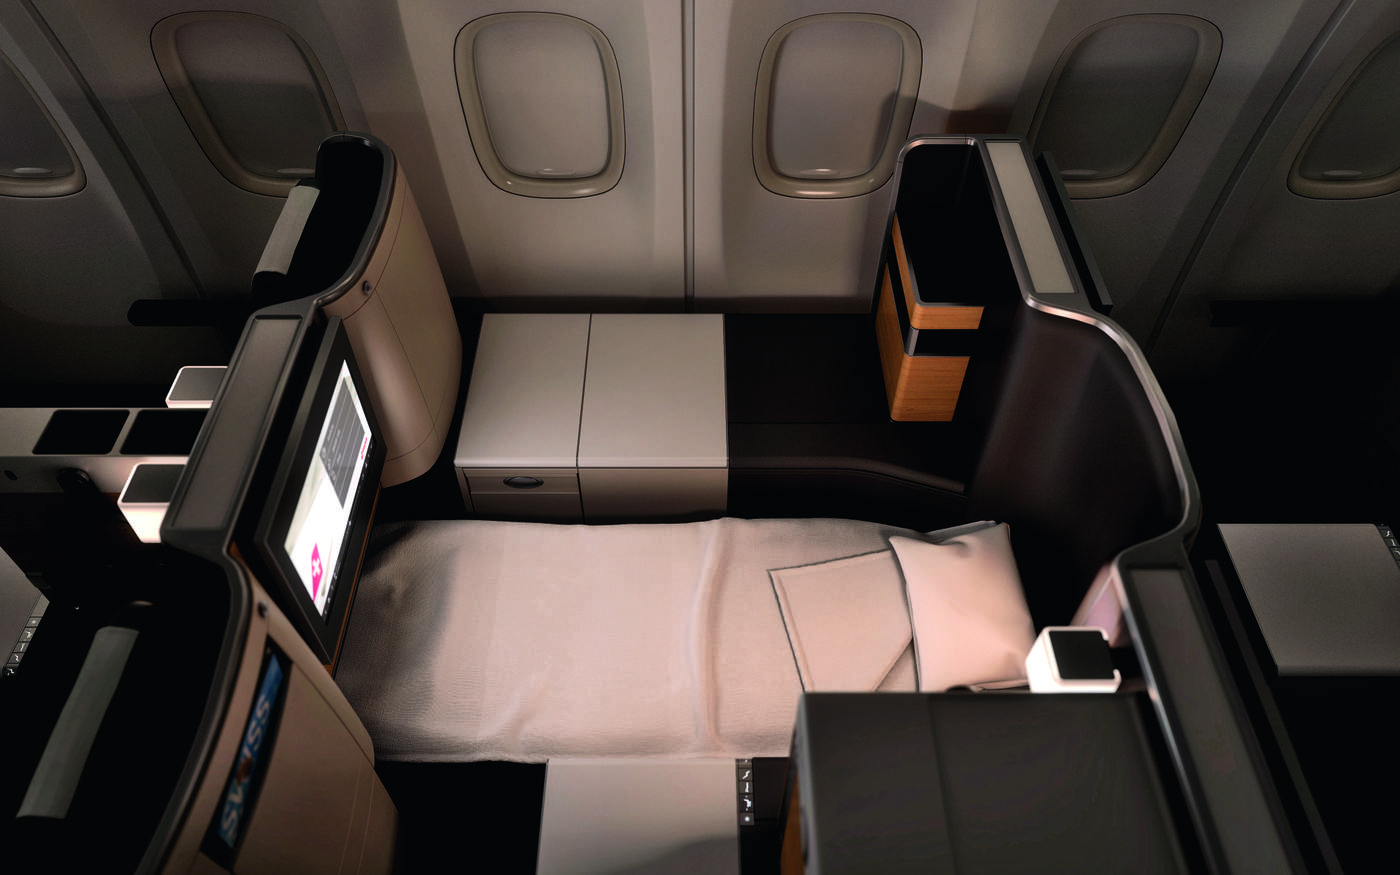 “Around The World” In Business Class For $2999, With A Catch